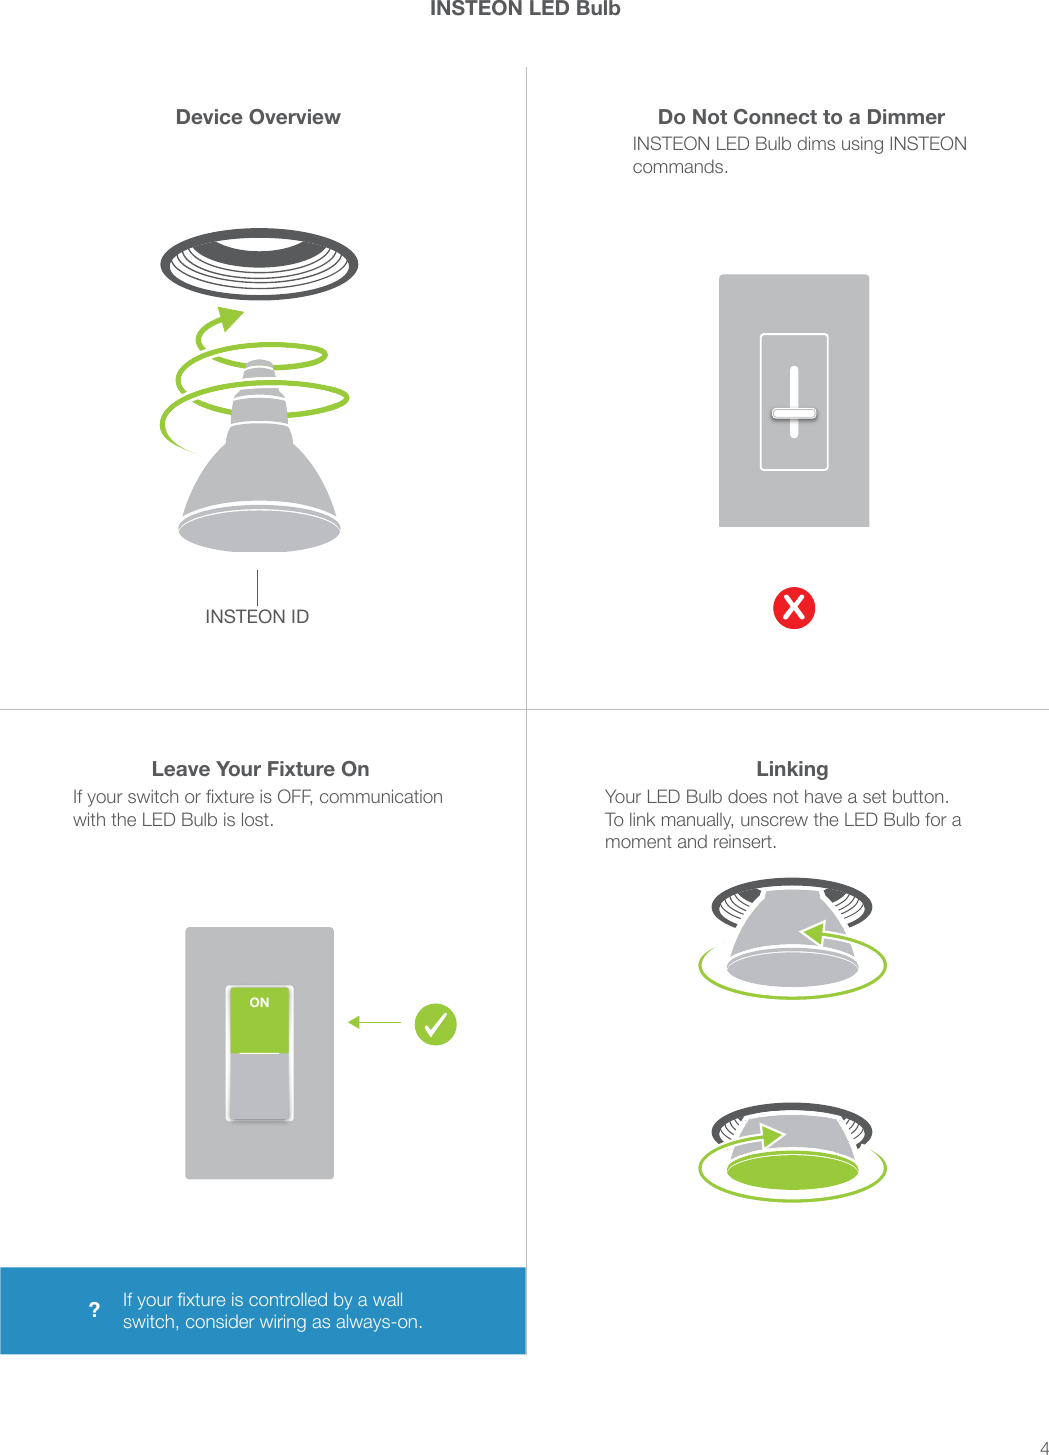 4Device Overview Do Not Connect to a DimmerINSTEON LED Bulbwith the LED Bulb is lost.INSTEON IDYour LED Bulb does not have a set button. XLeave Your Fixture On Linking?ON